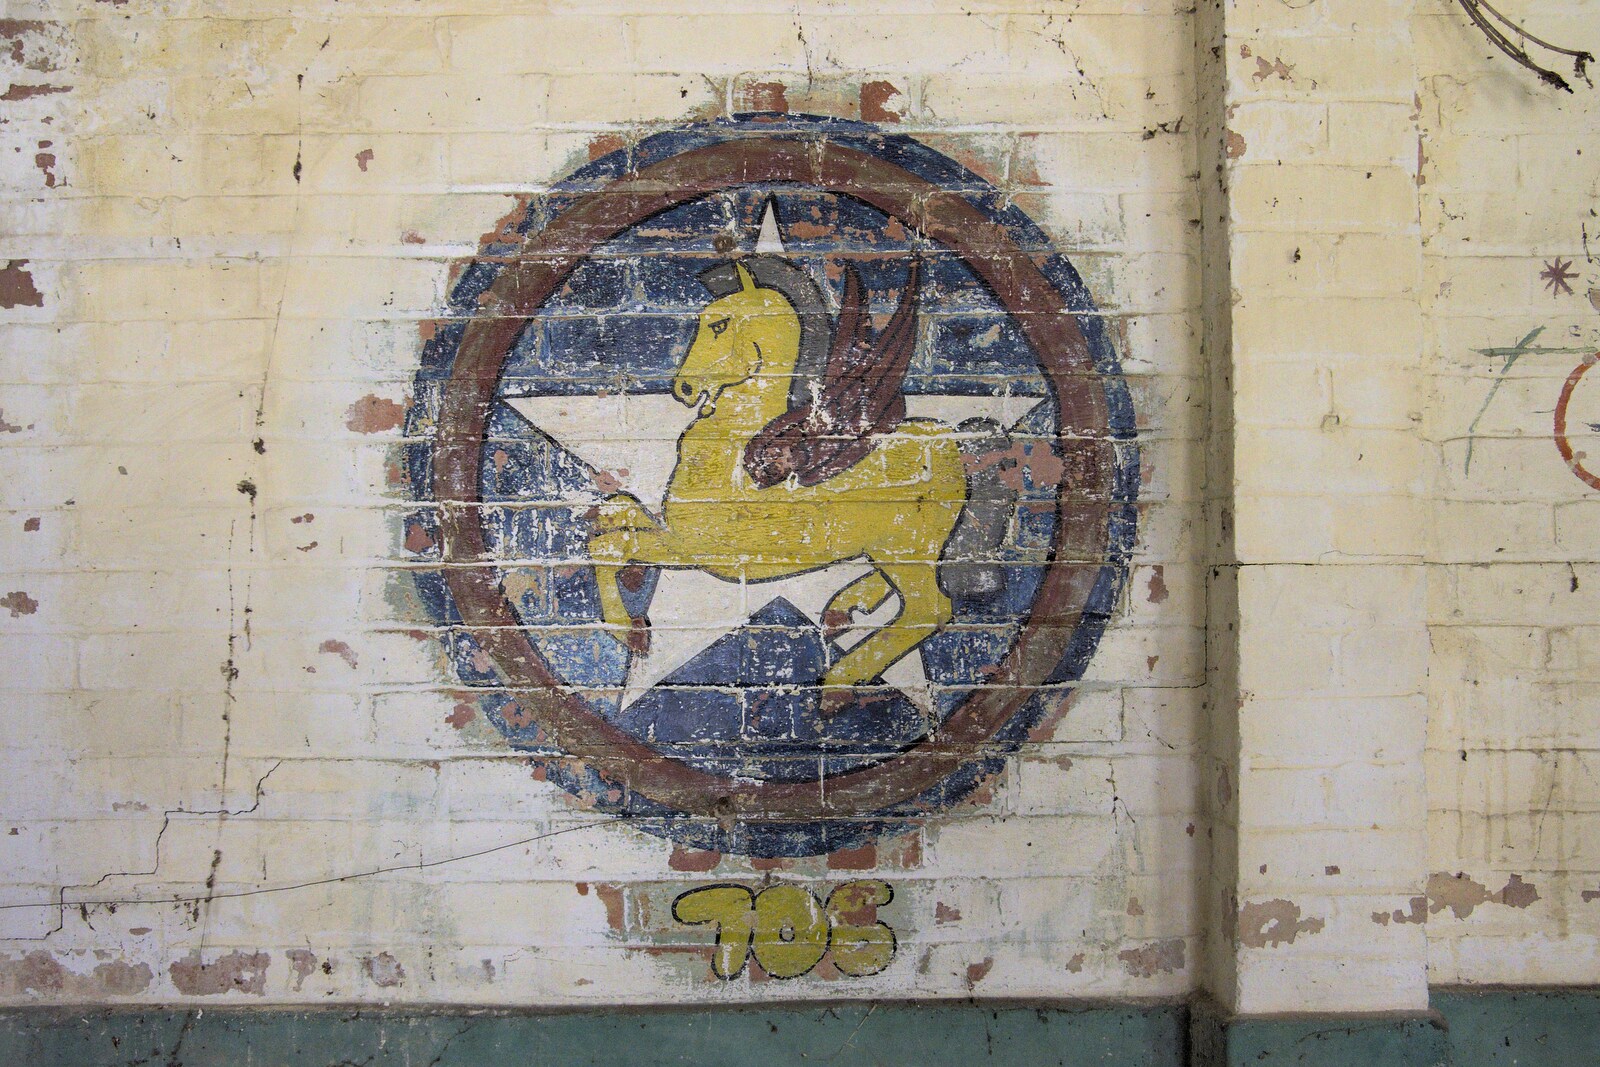 A winged unicorn - emblem of the 705th Bomb Squadron from A 1940s Timewarp, Site 4, Bungay Airfield, Flixton, Suffolk - 9th June 2022